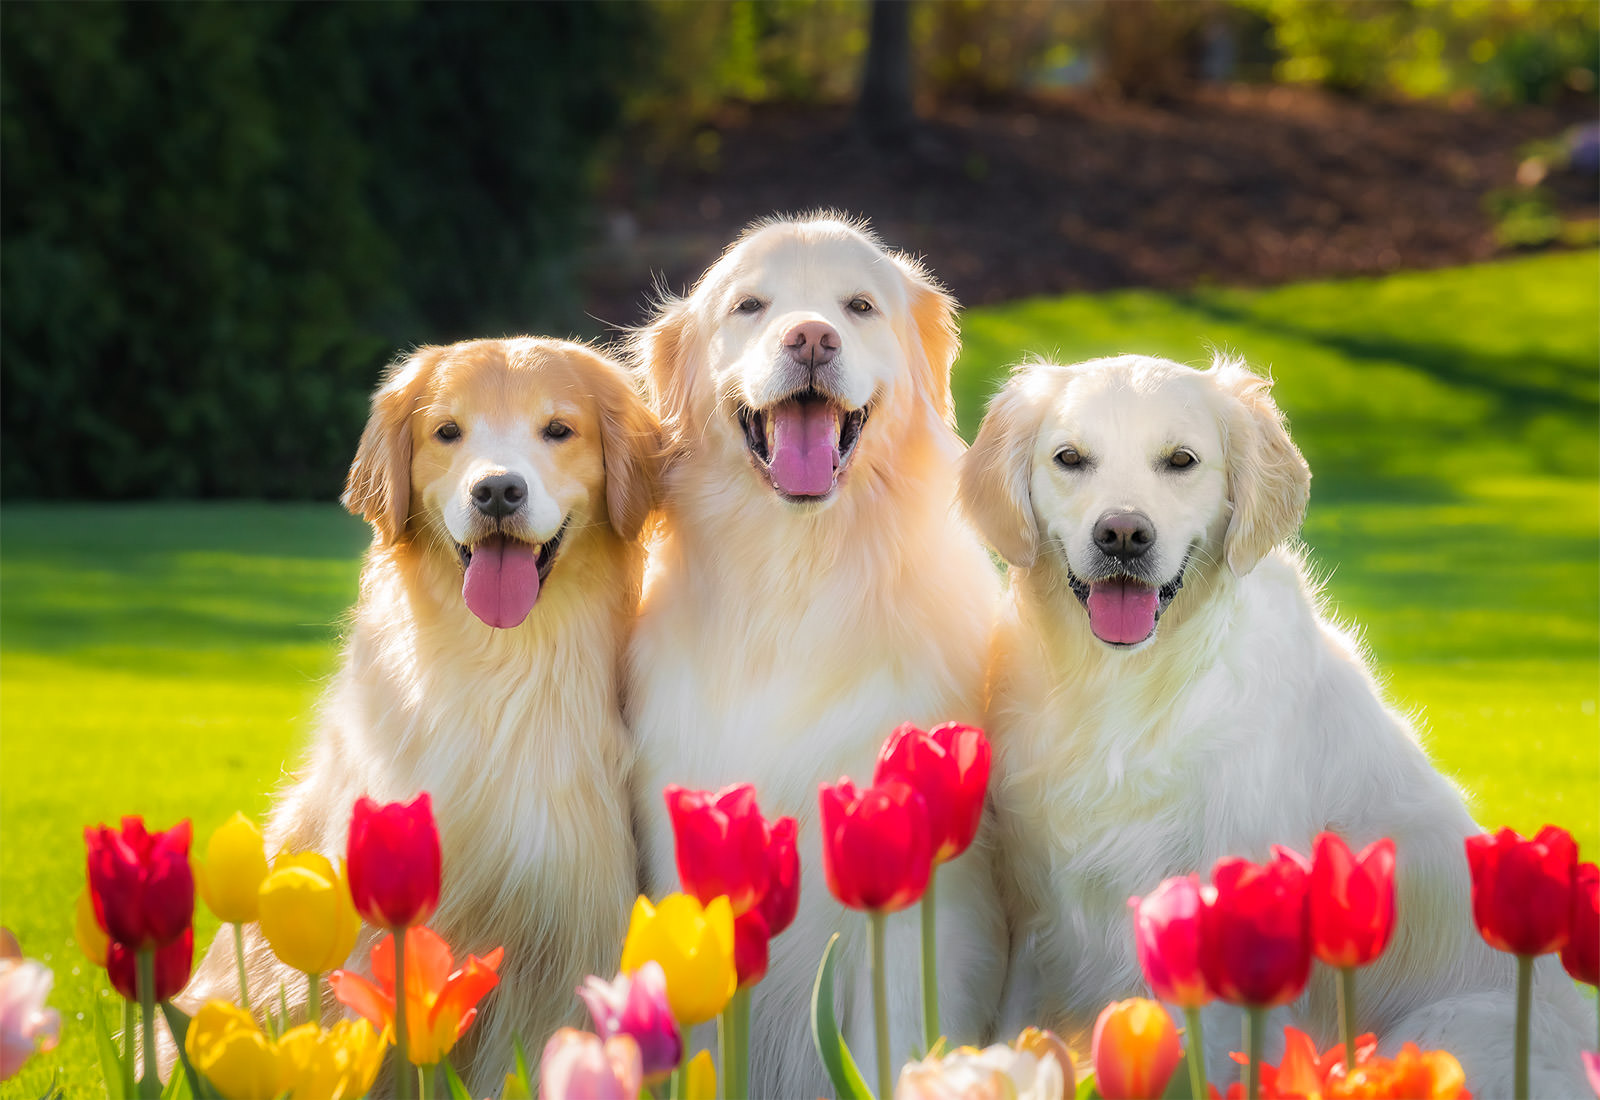 Three Golden Retrievers smiling in the tulips